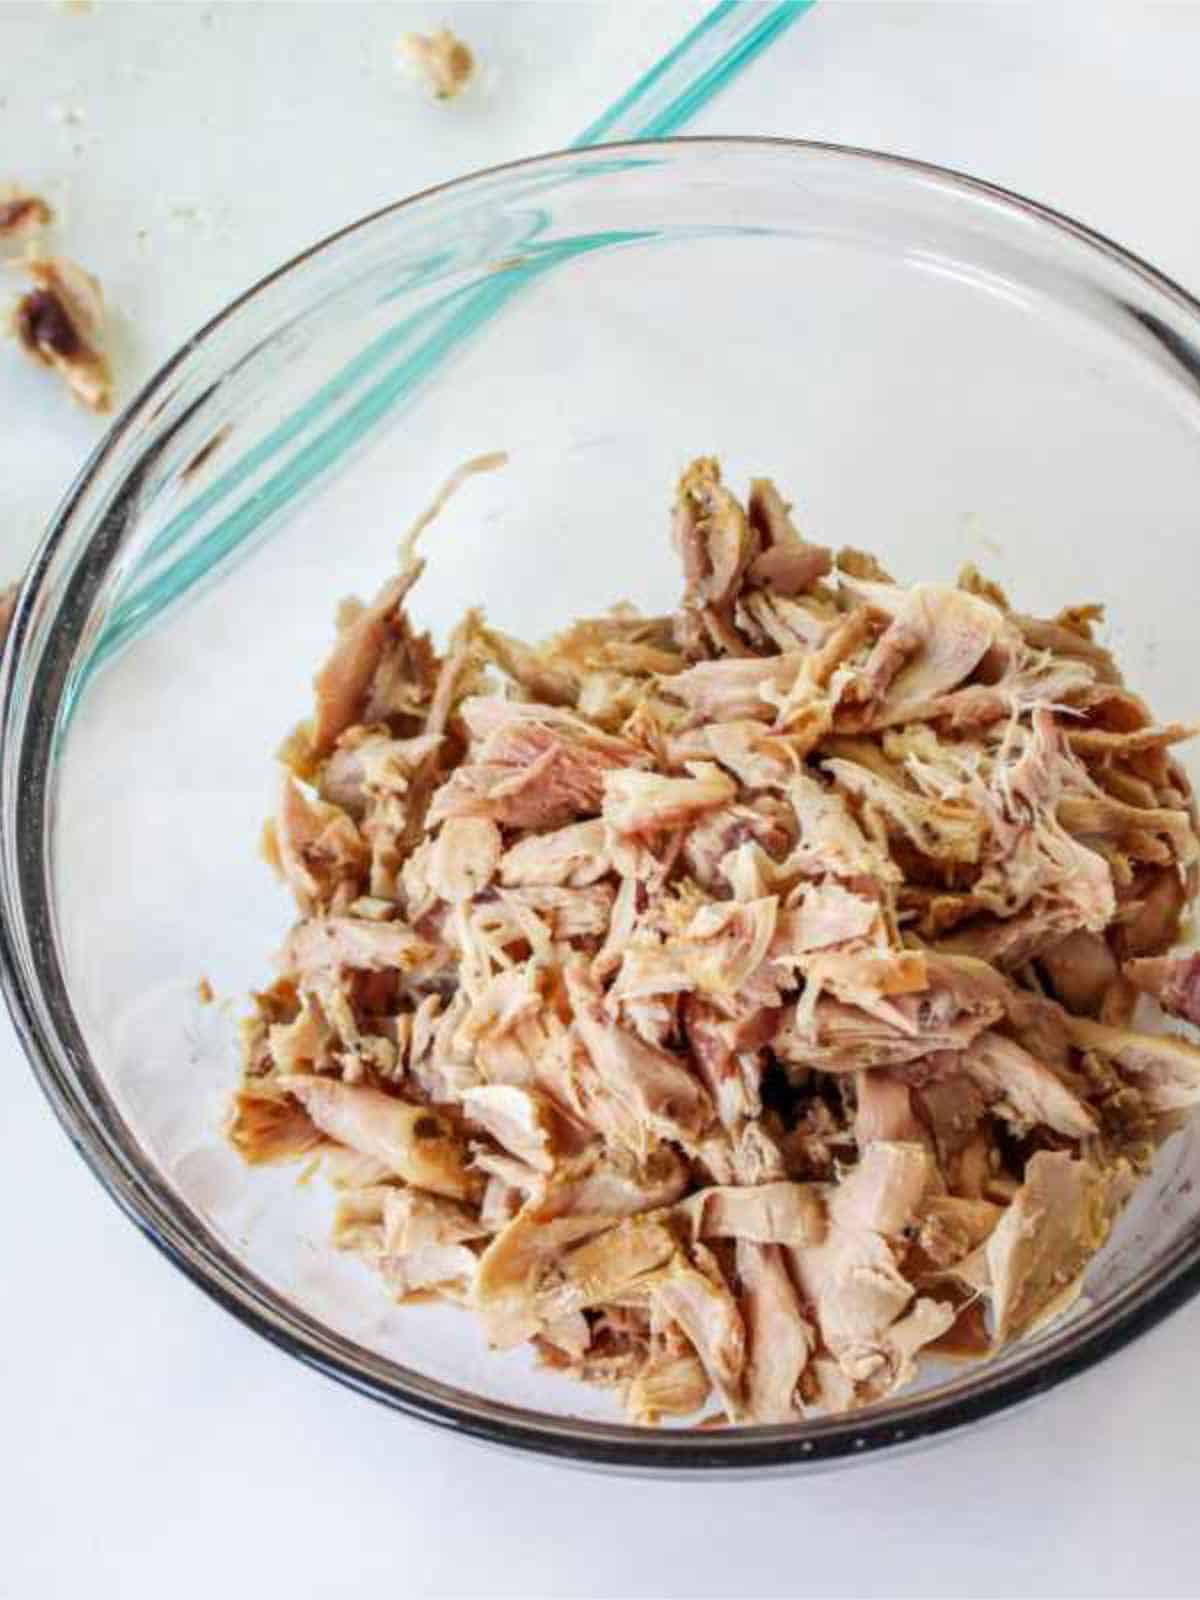 Shredded chicken to add to the chicken soup pot.